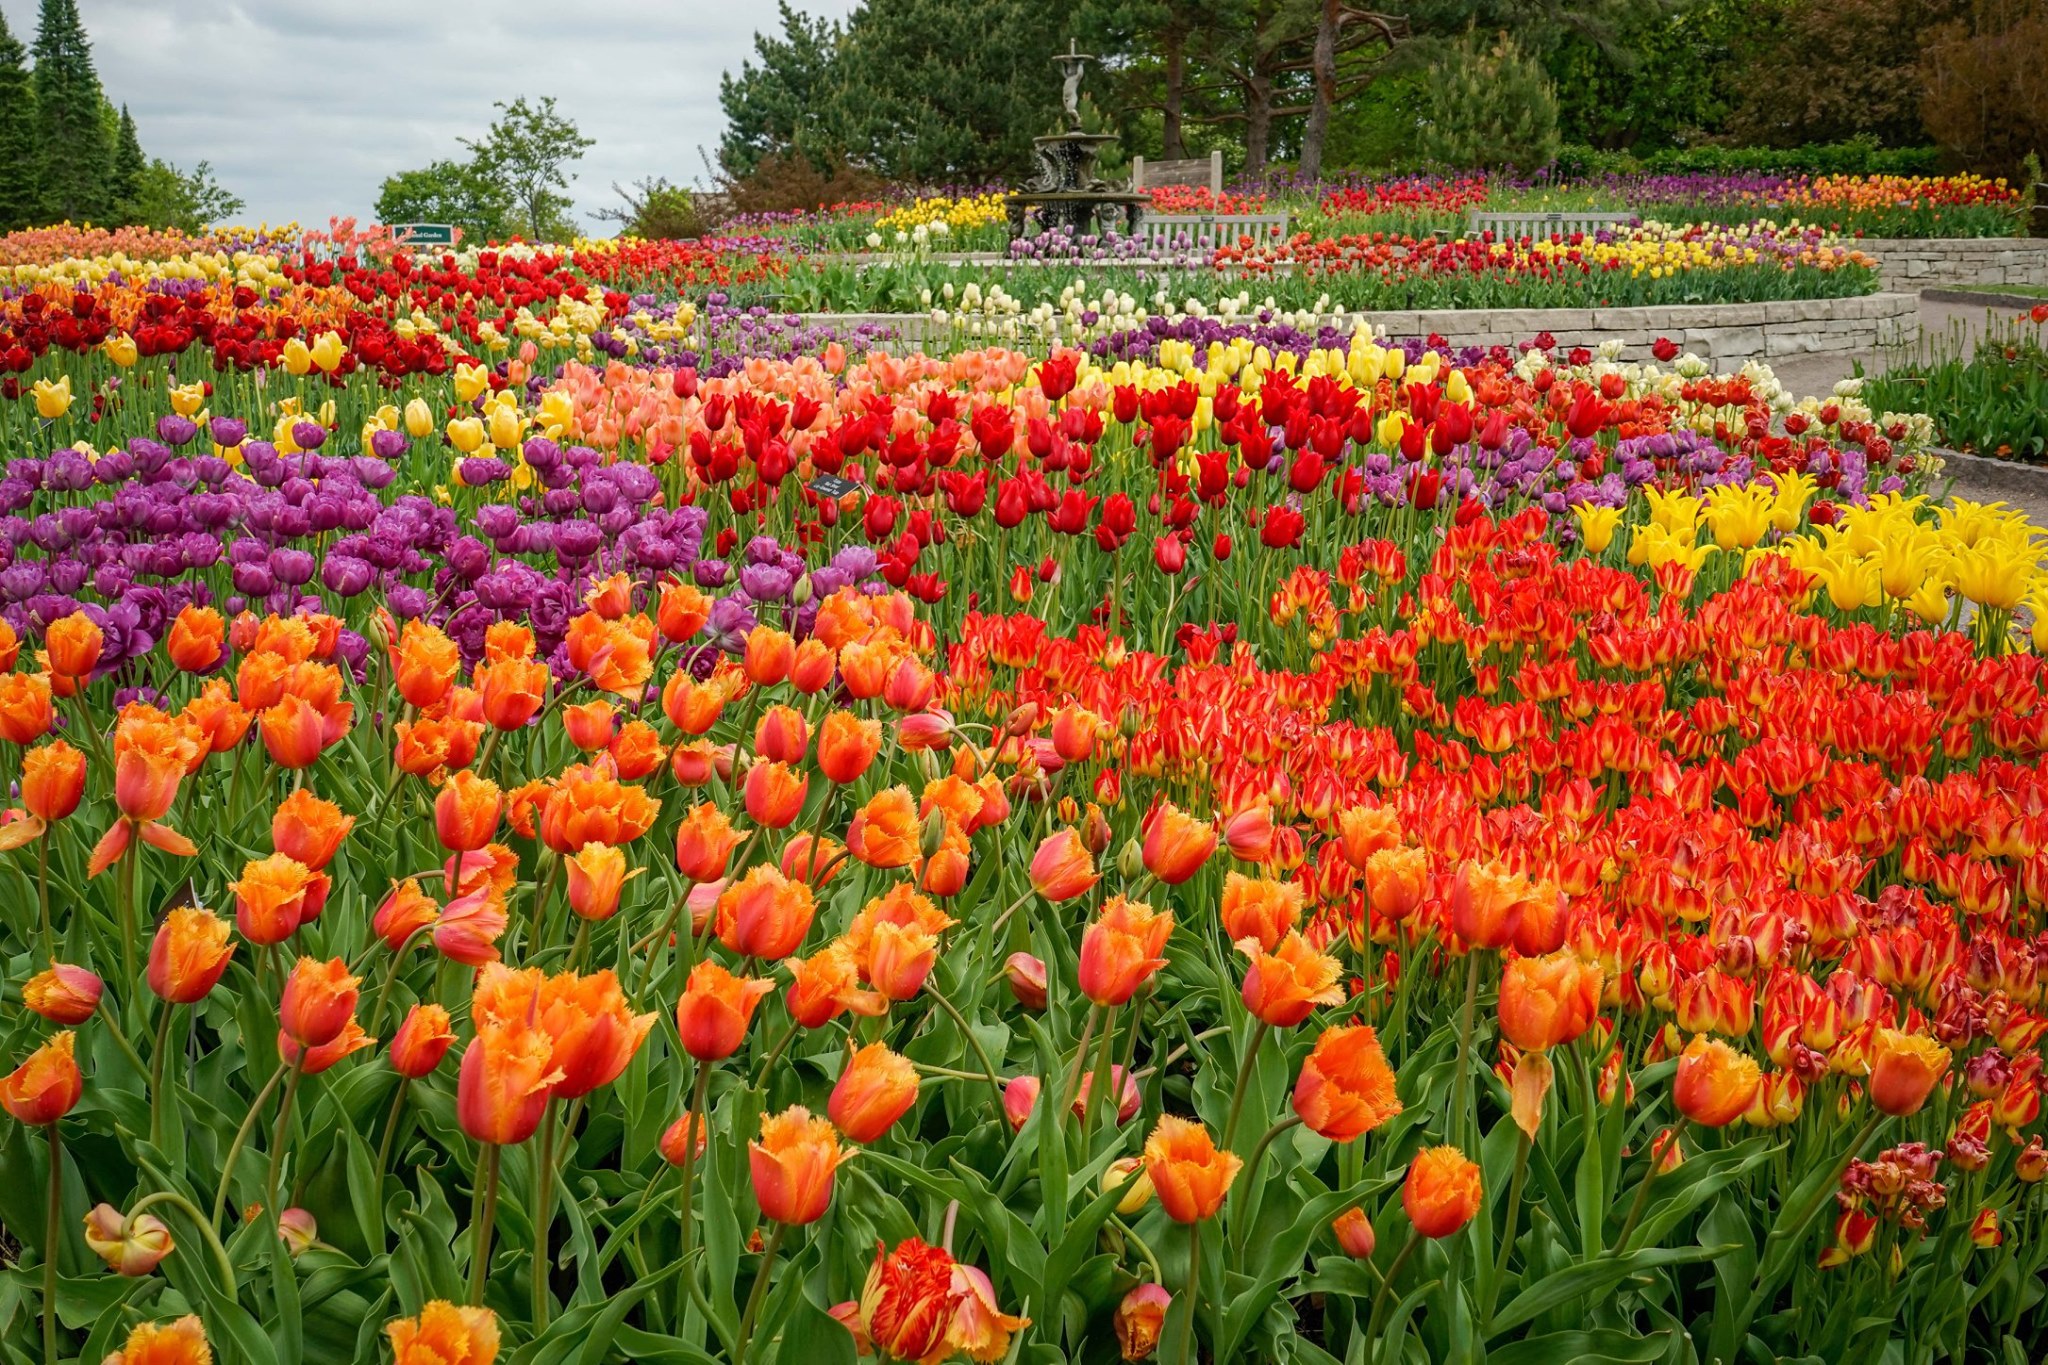 A Trip To Minnesota's Neverending Tulip Field Will Make Your Spring